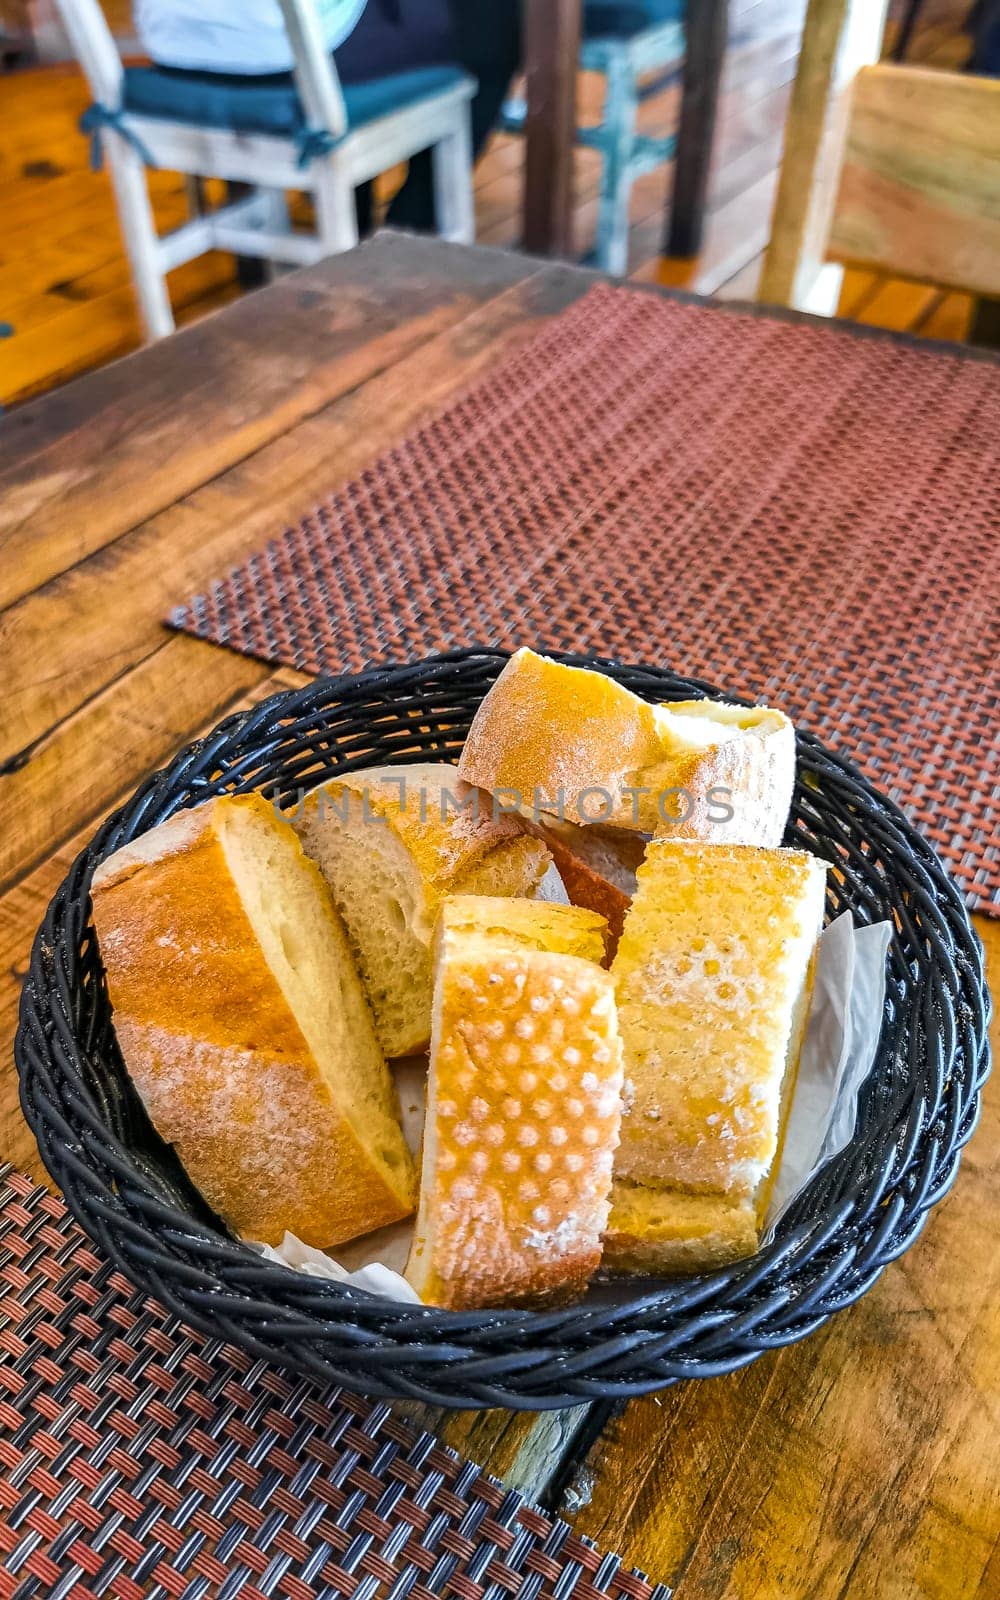 Bread in basket on wooden table dish meal food and drink in the restaurant PapaCharly Papa Charly in Playa del Carmen Quintana Roo Mexico.